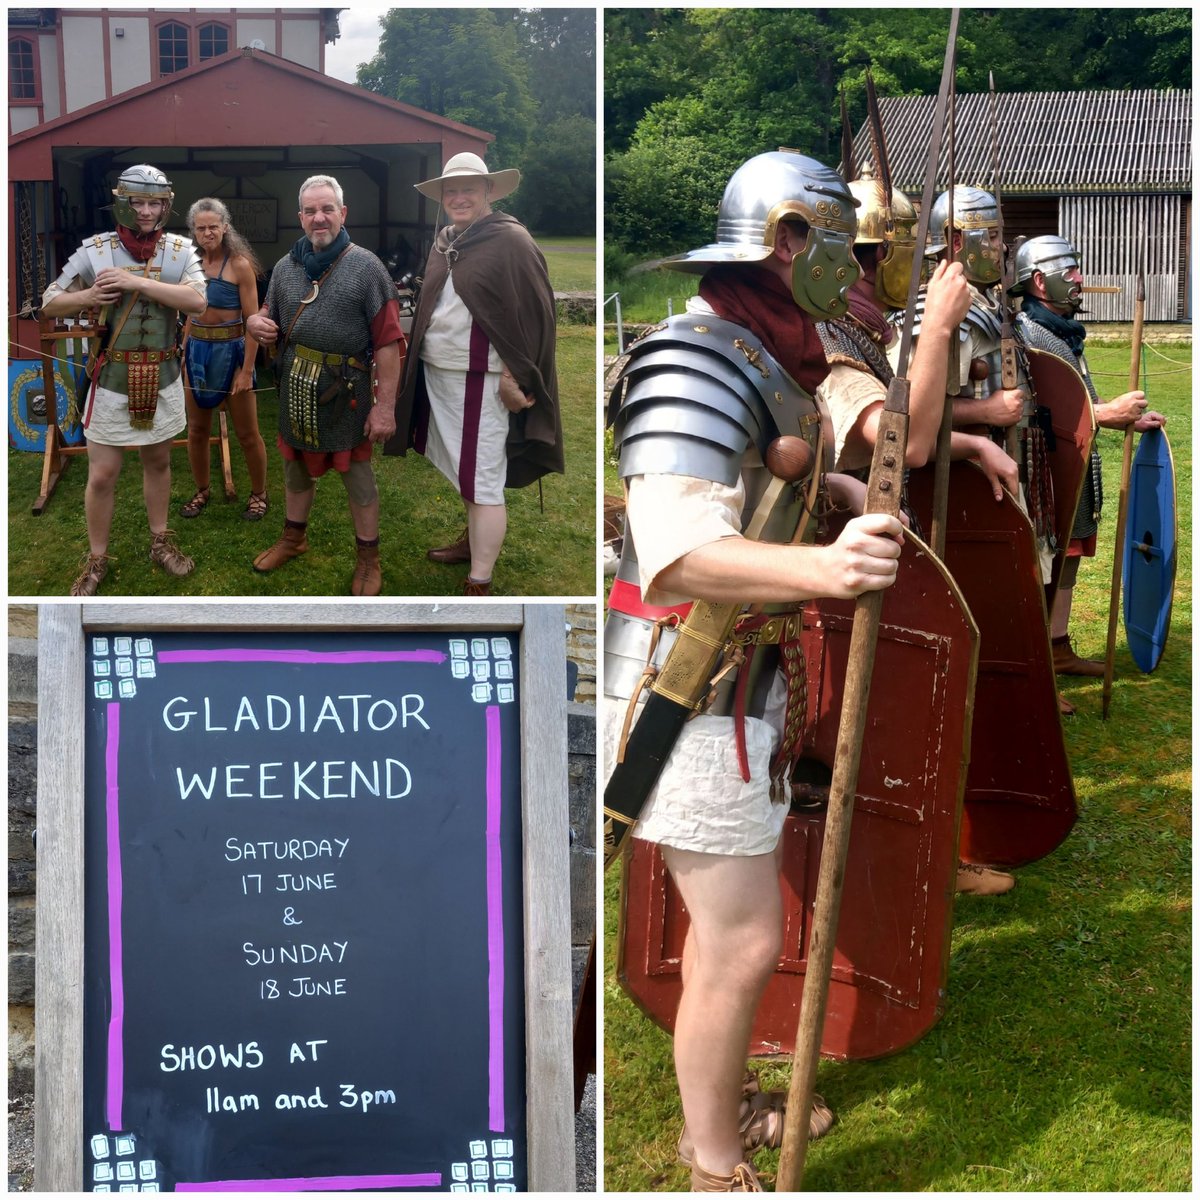 Gladiator weekend has begun! Still looking for a #FathersDay outing? Head down to Chedworth Roman Villa. #visitgloucestershire #cotswolds